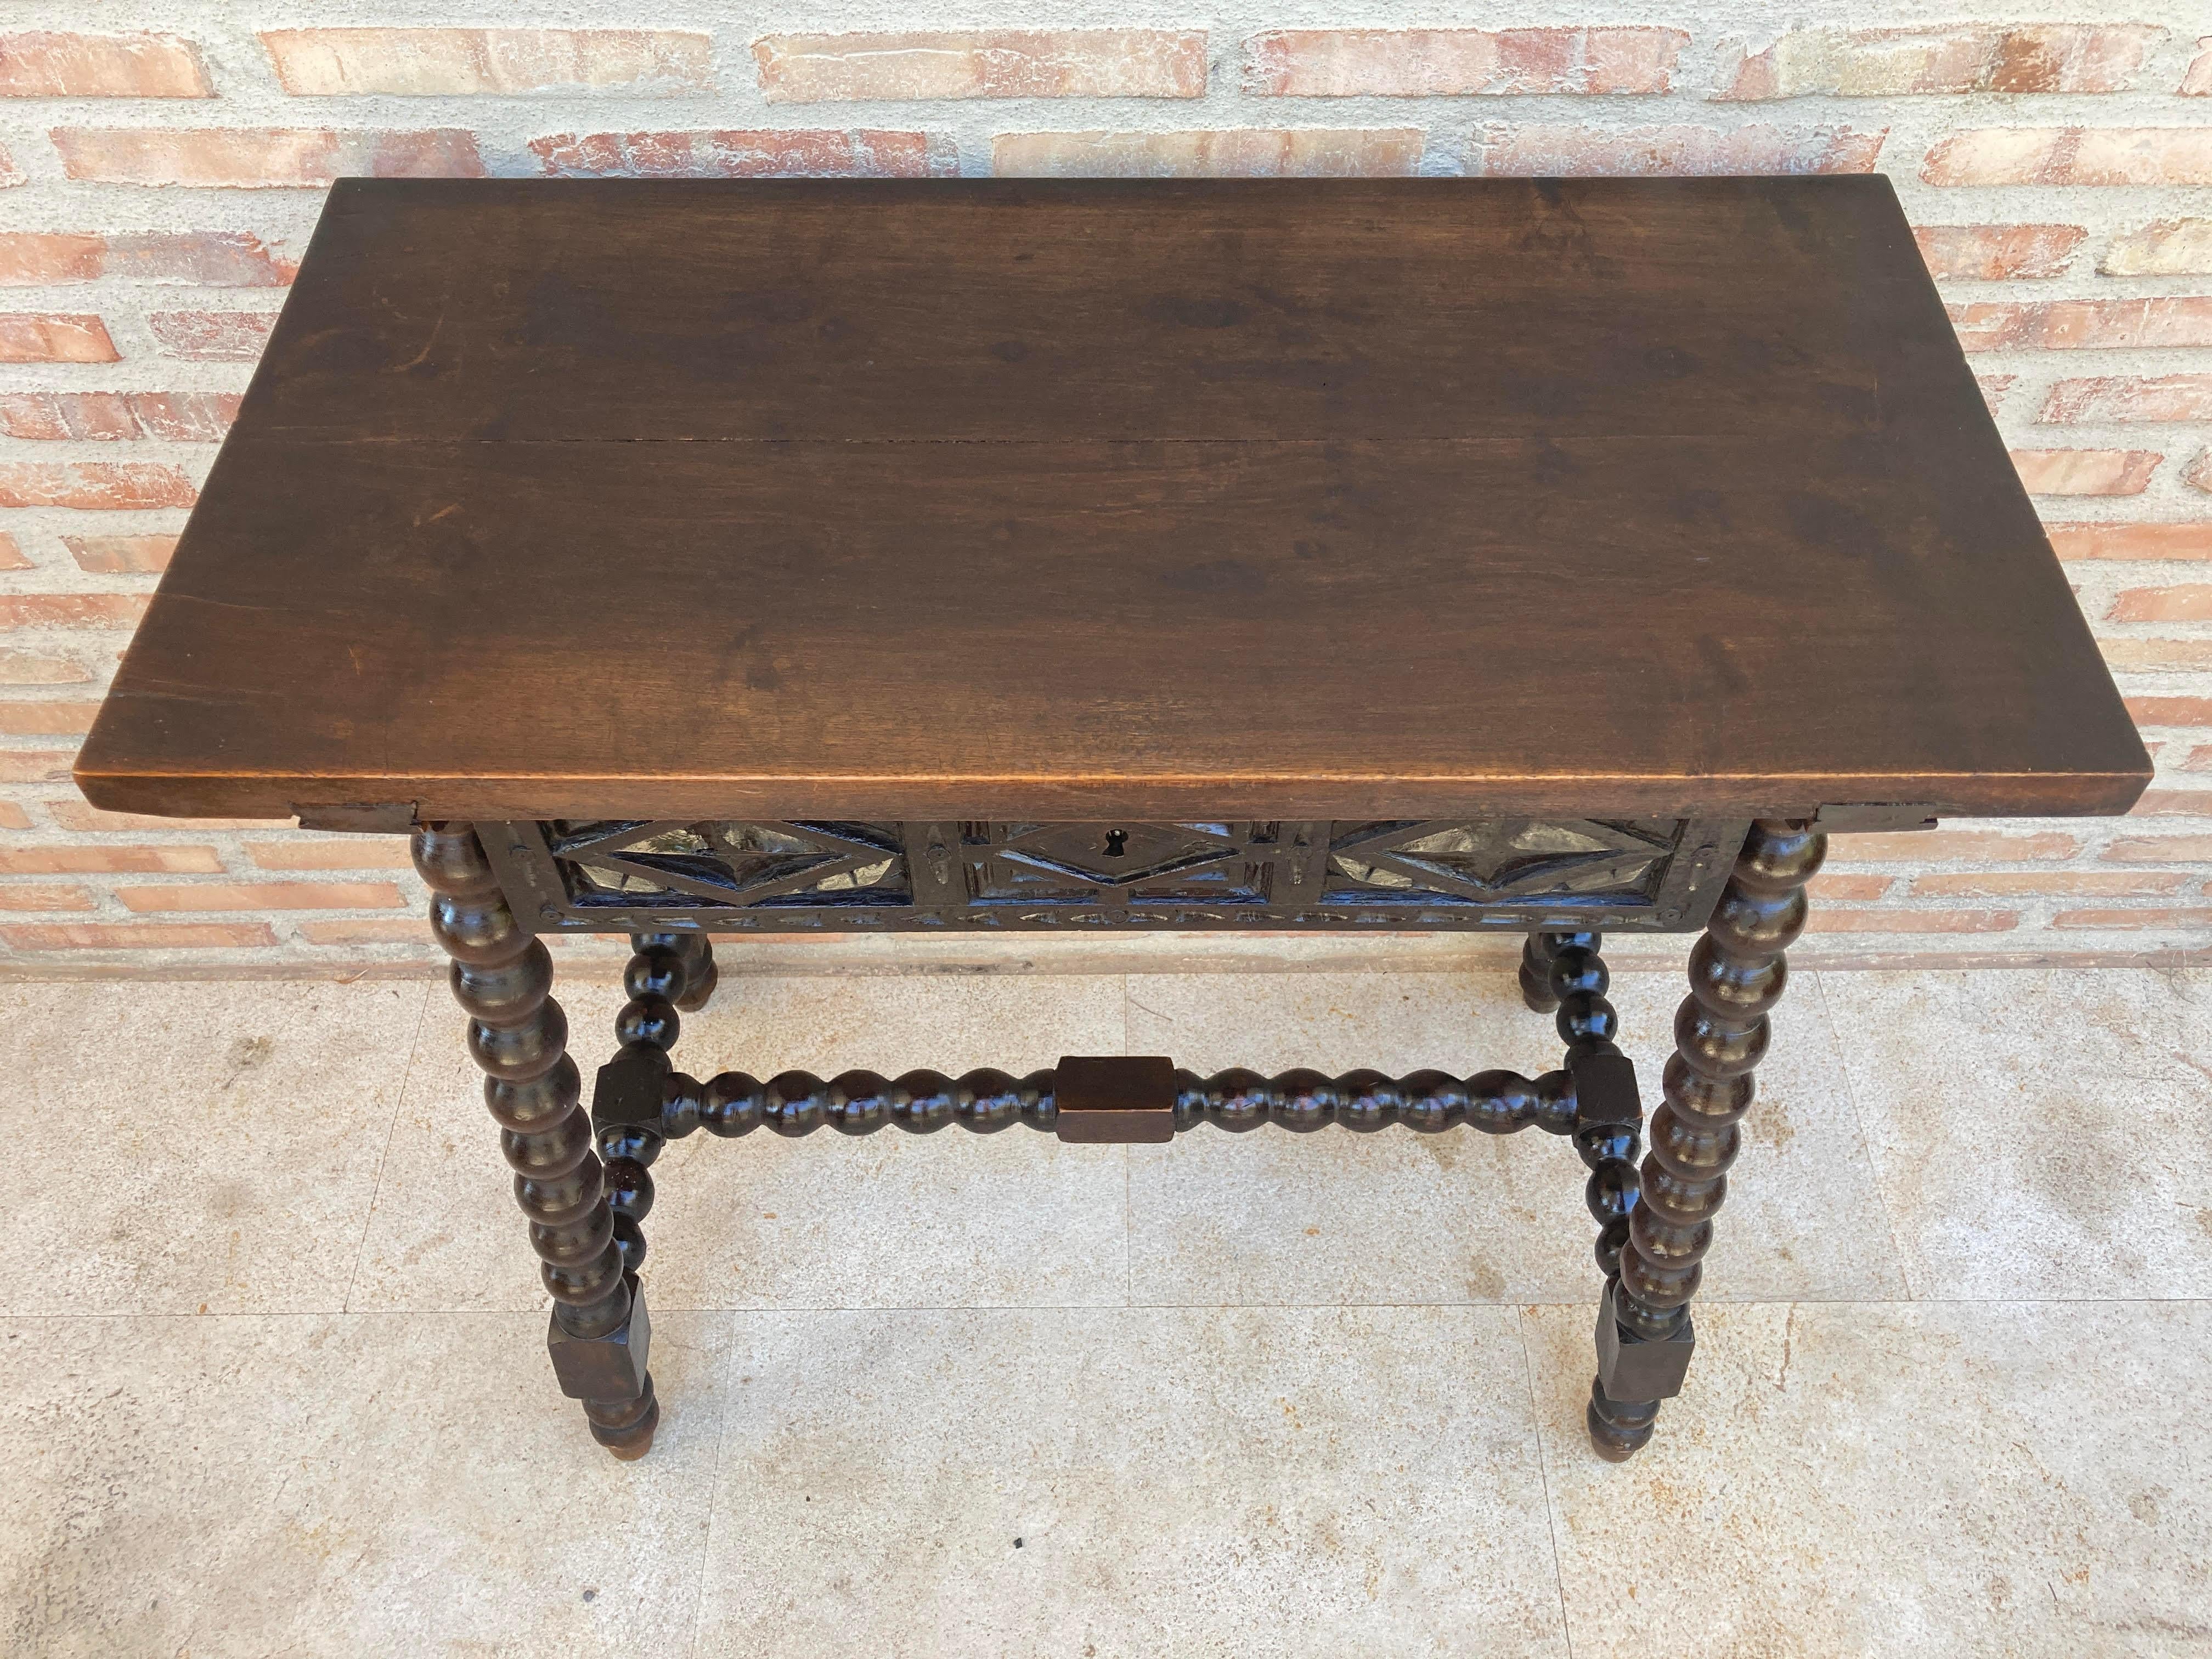 19th Century Spanish Walnut Side Table with Turned Legs, Flat Top with a Lockabl 5